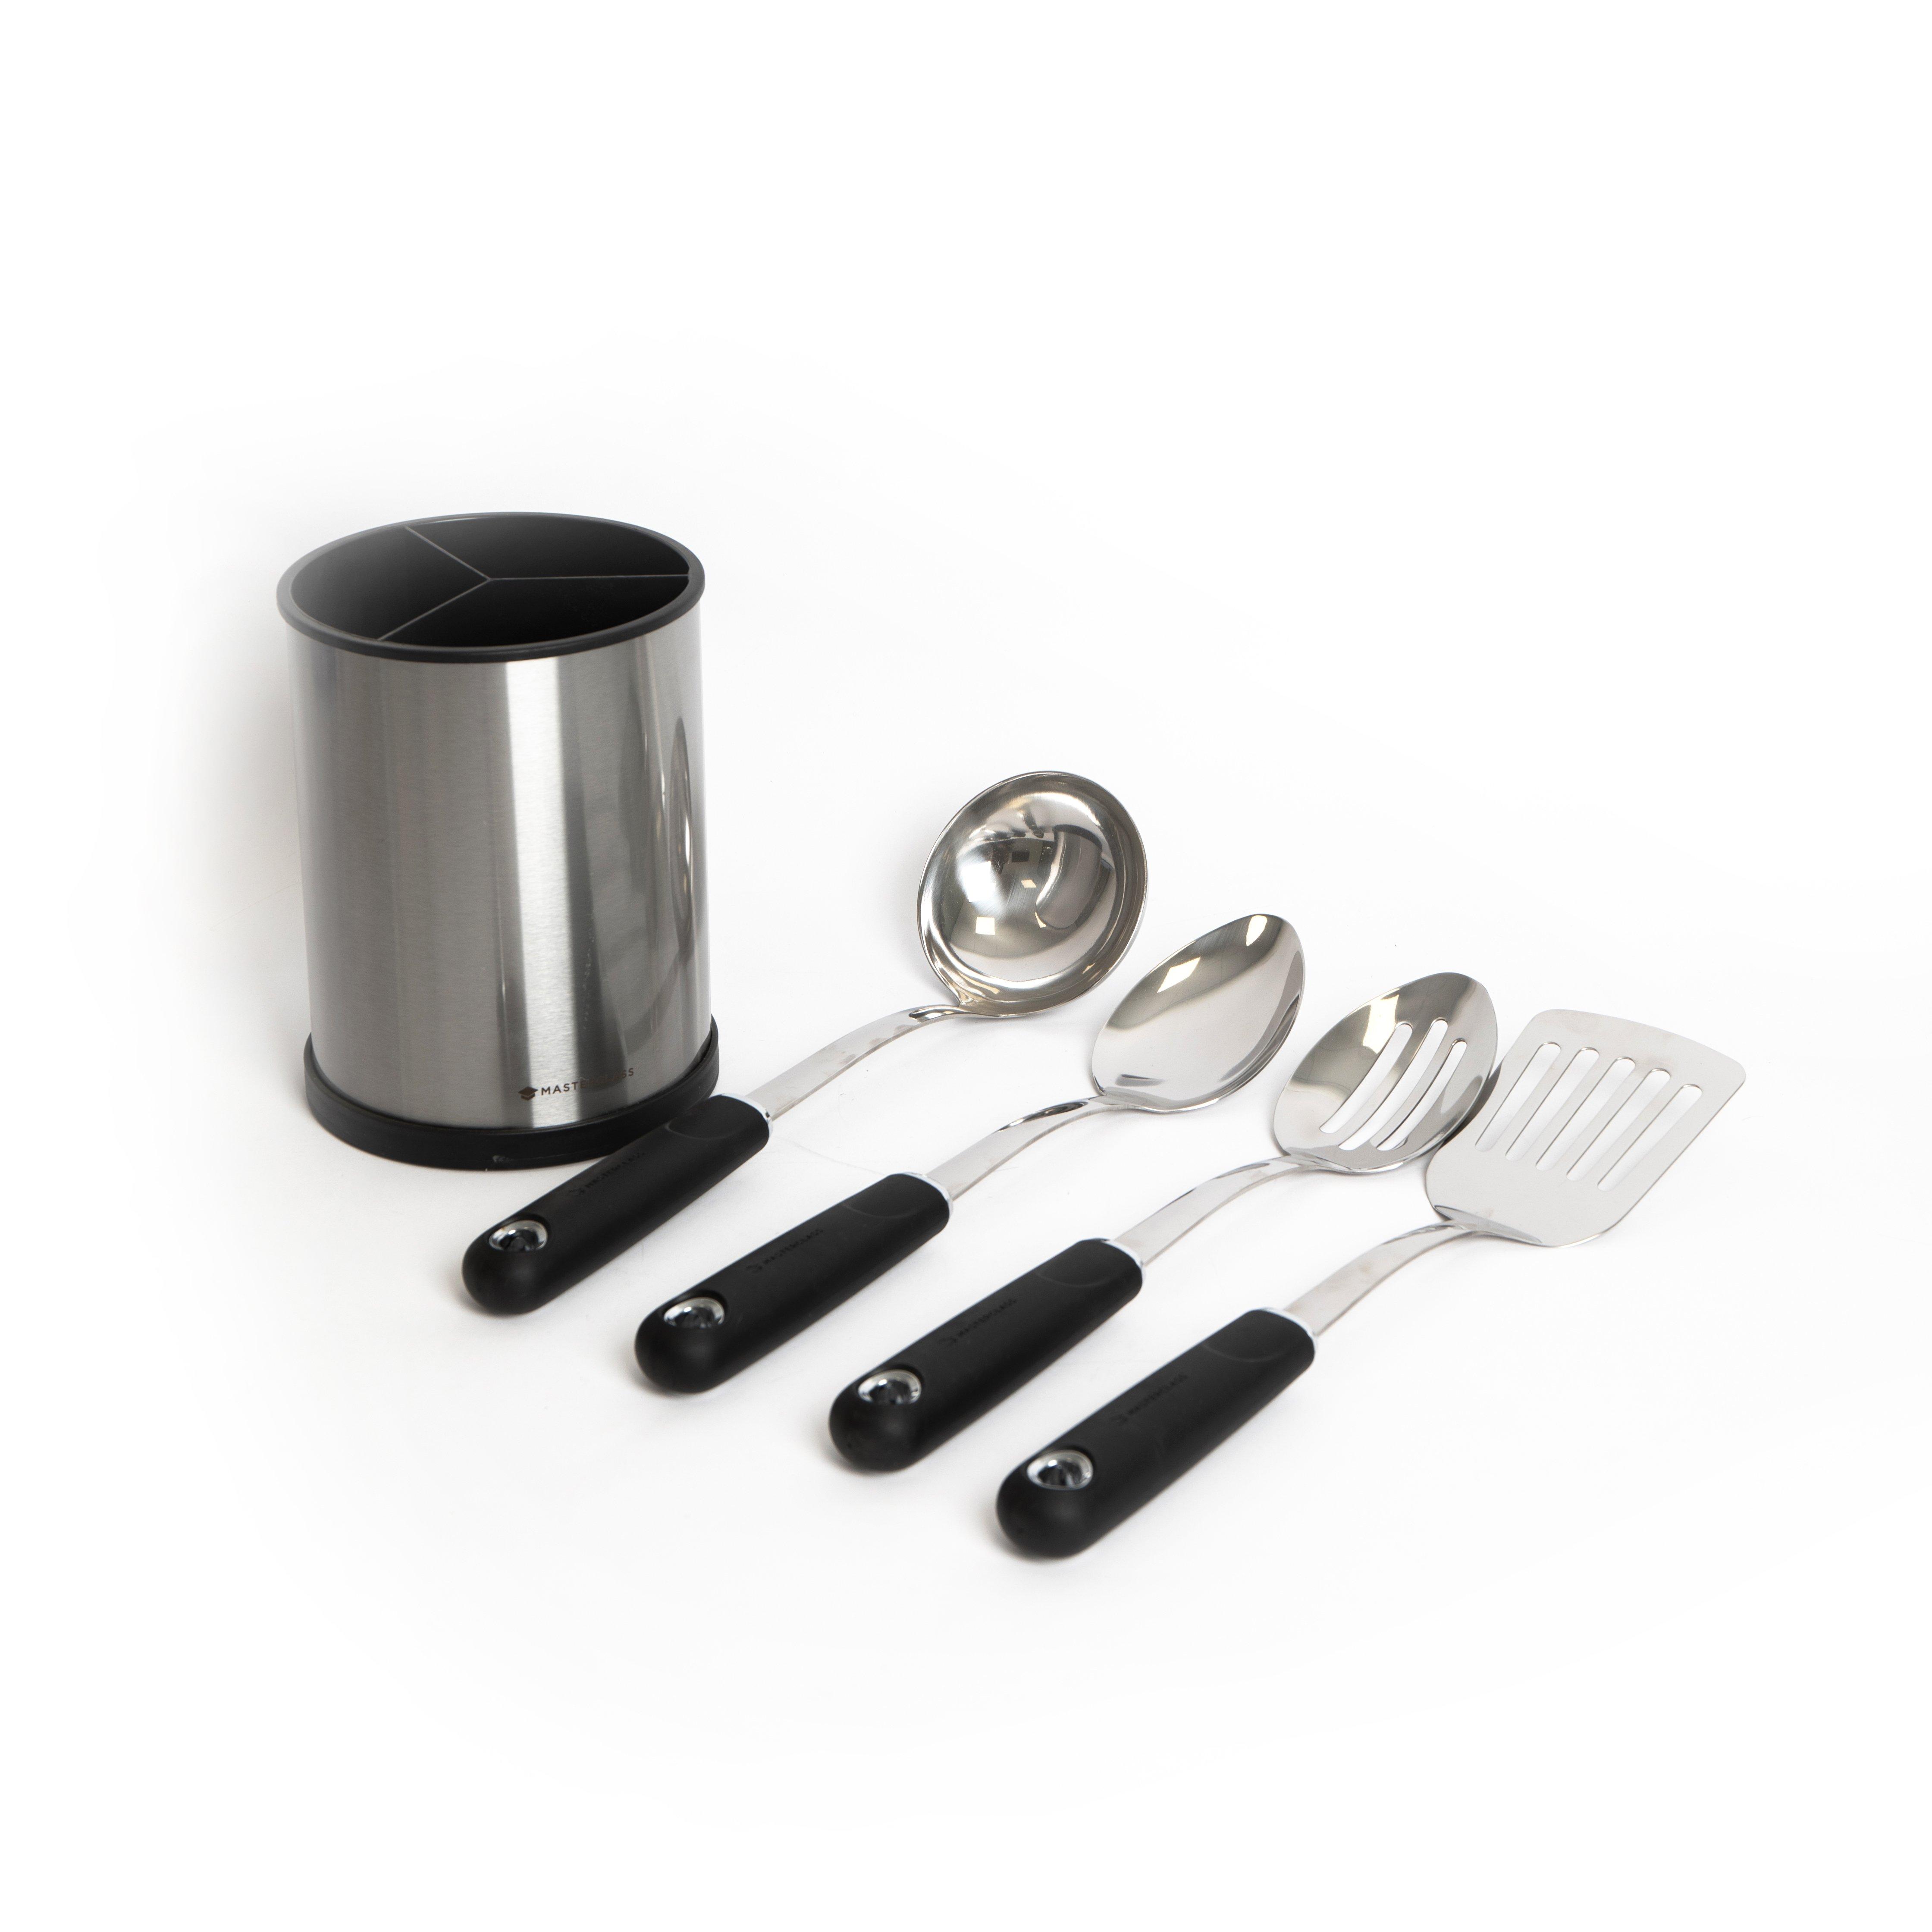 5pc Stainless Steel Utensil Set with Cooking Spoon, Slotted Spoon, Slotted Turner, Ladle and Utensil